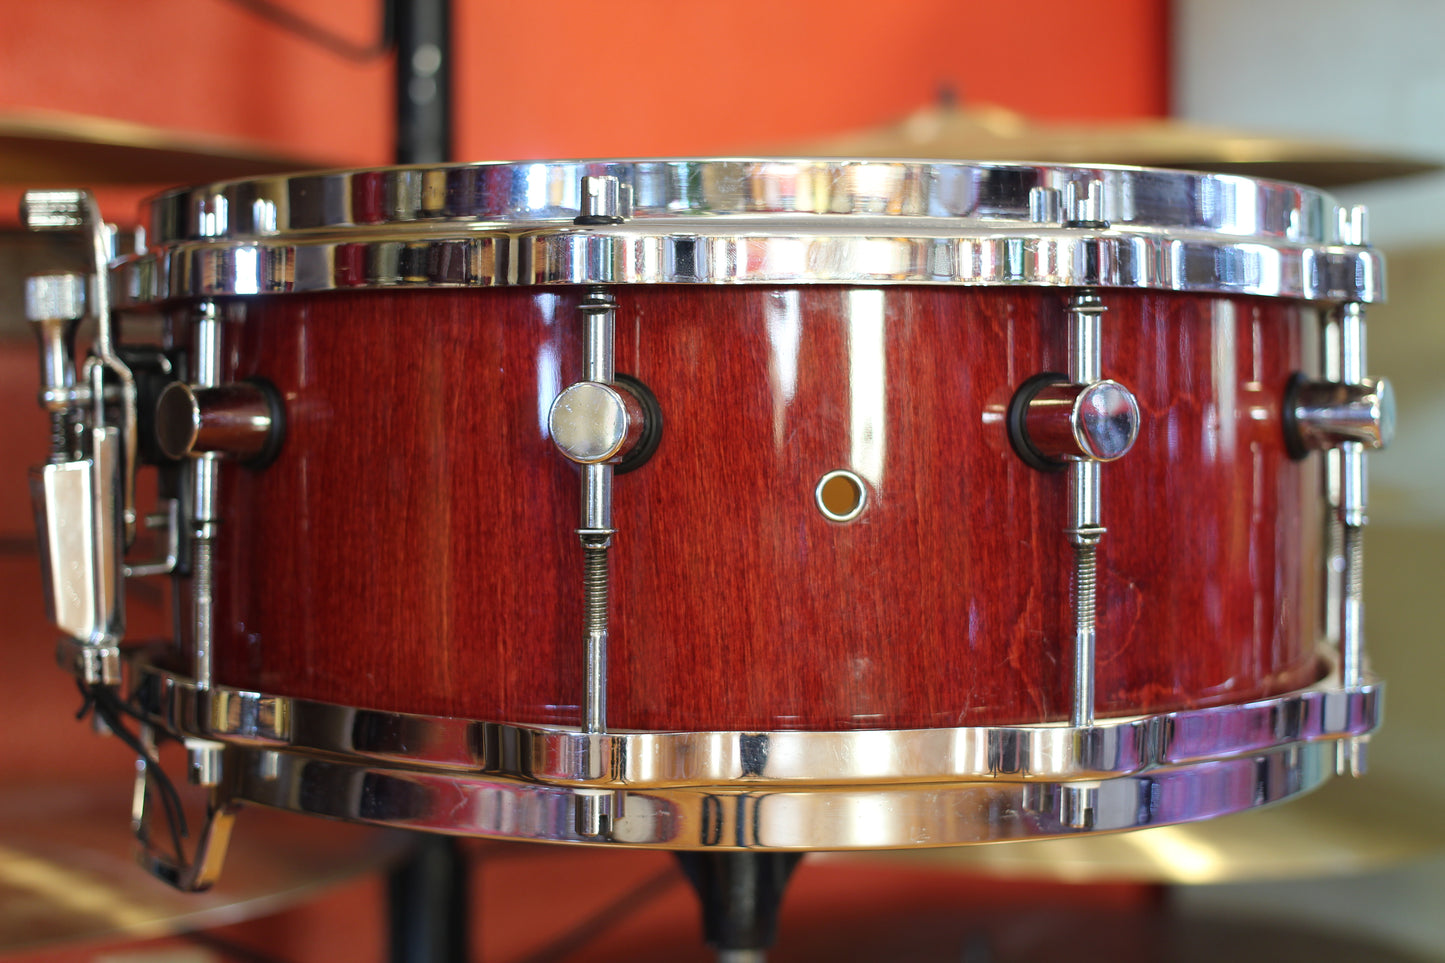 1990's Sonor HD-500 Hilite in Red Maple 5.75"x14"